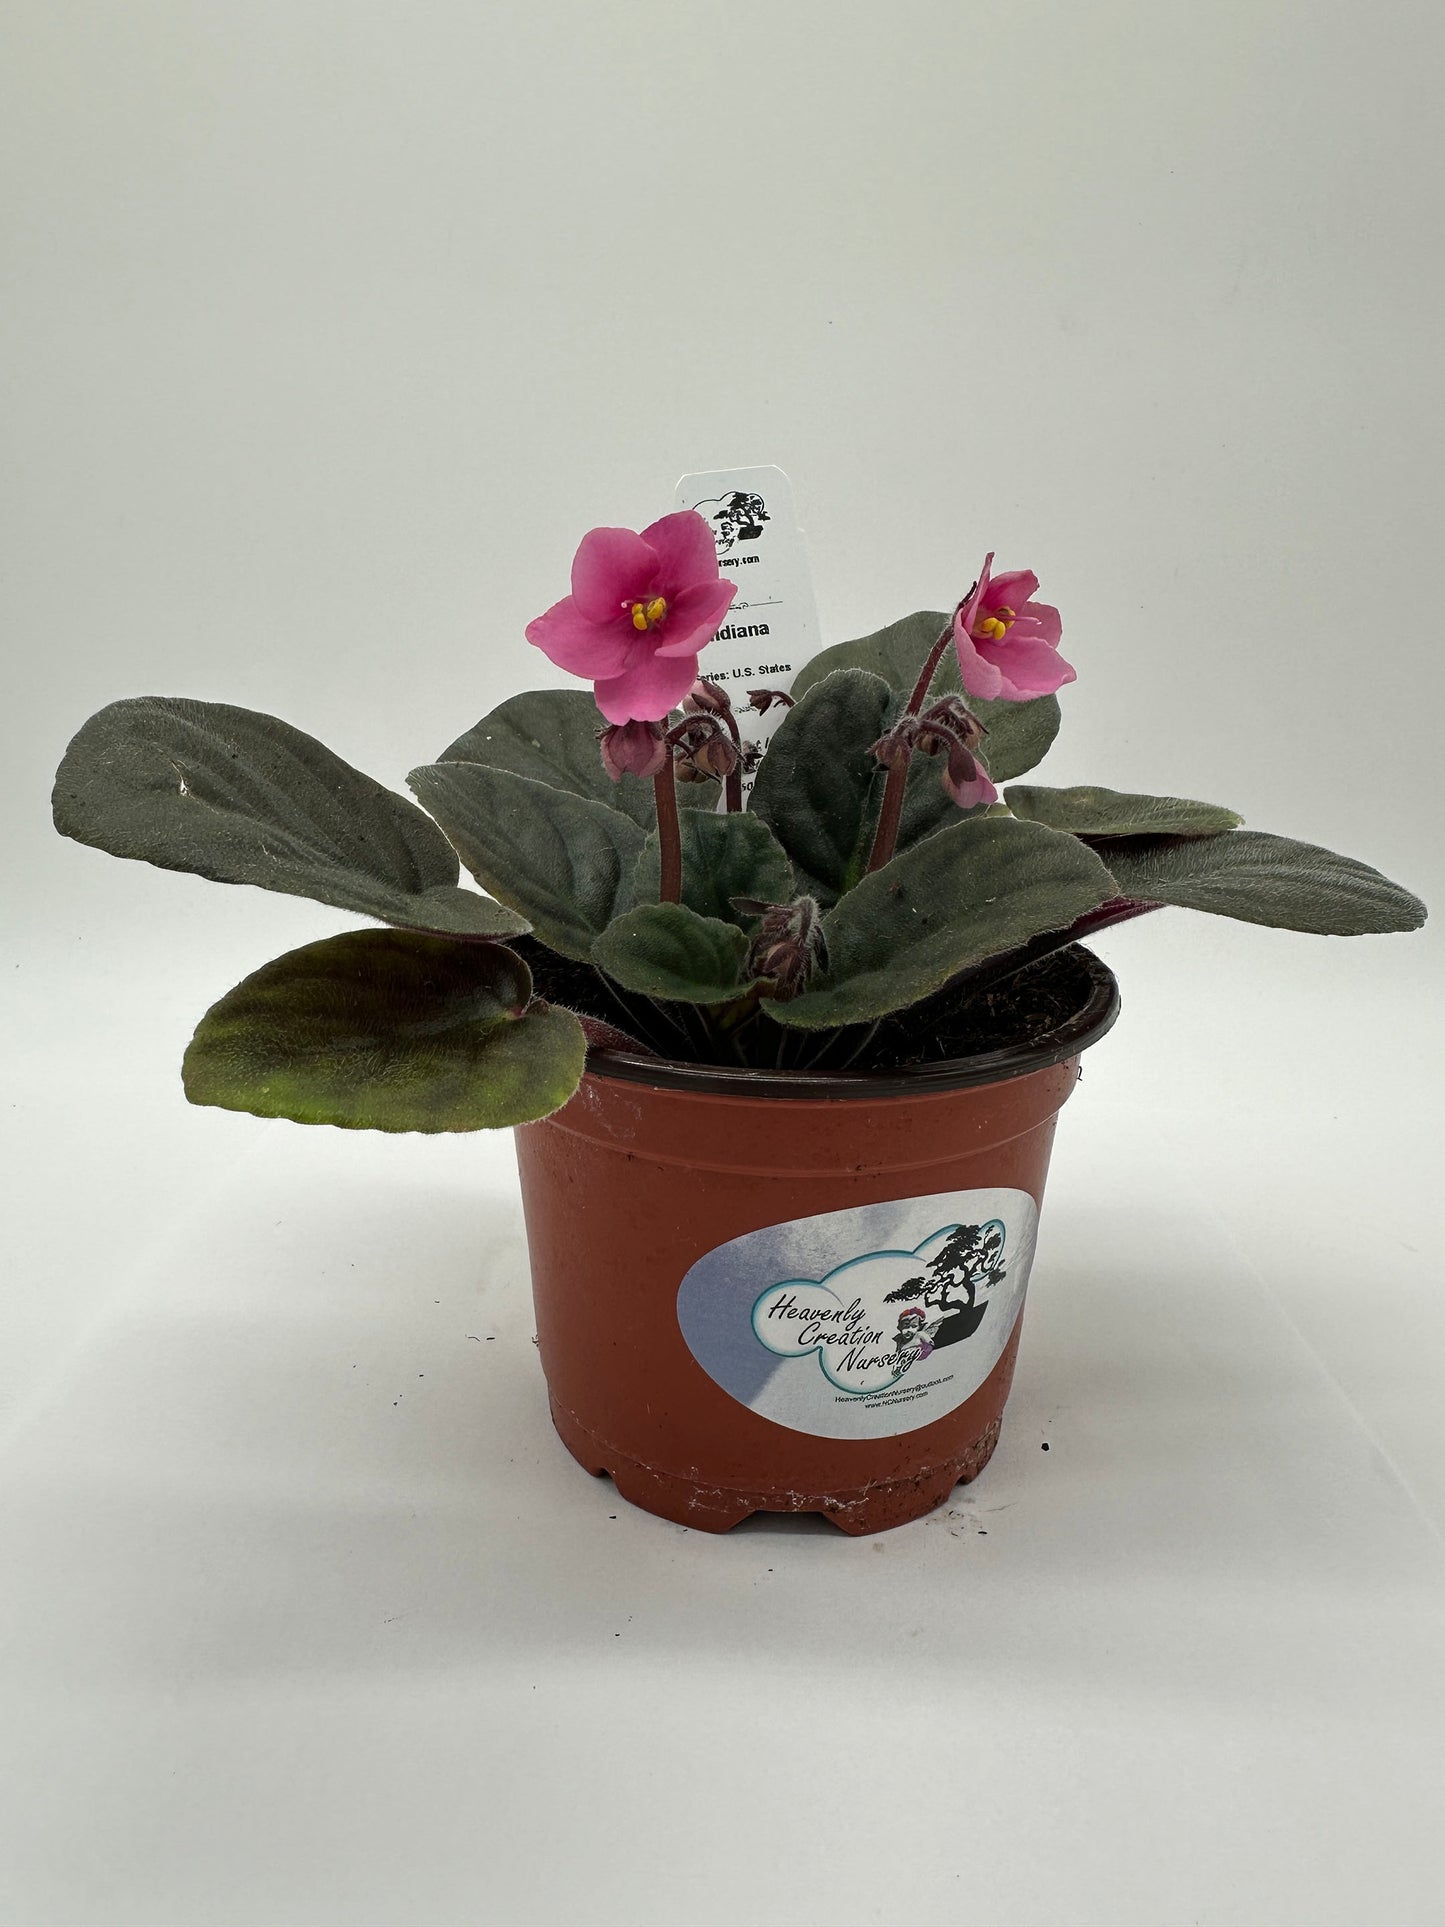 Indiana - Live African Violet 4" - Series: U.S. States